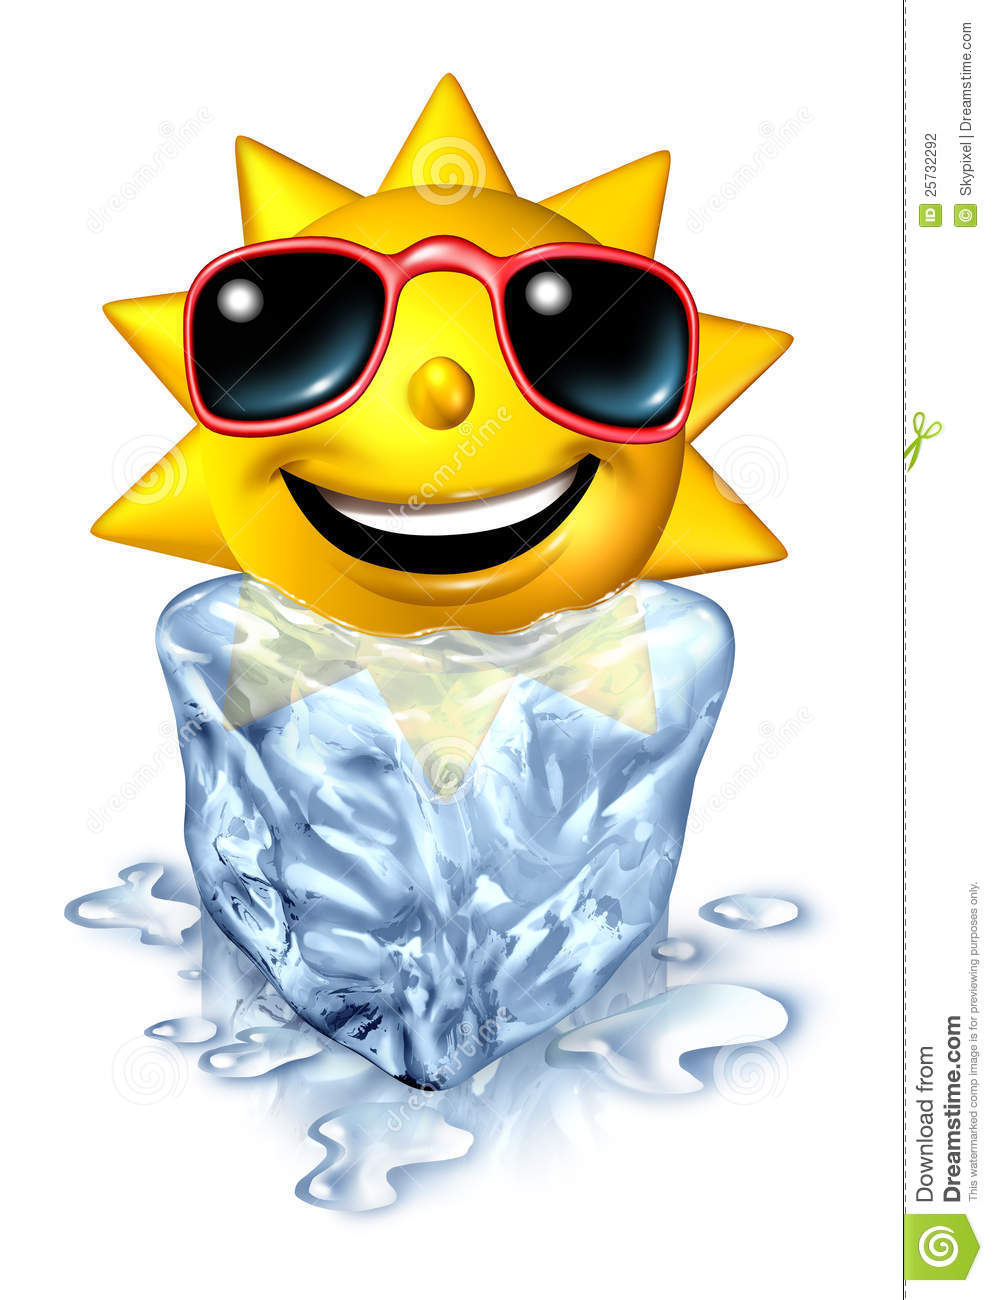 Cool Down Refreshment Relief Concept With A Hot Vacation Summer Sun